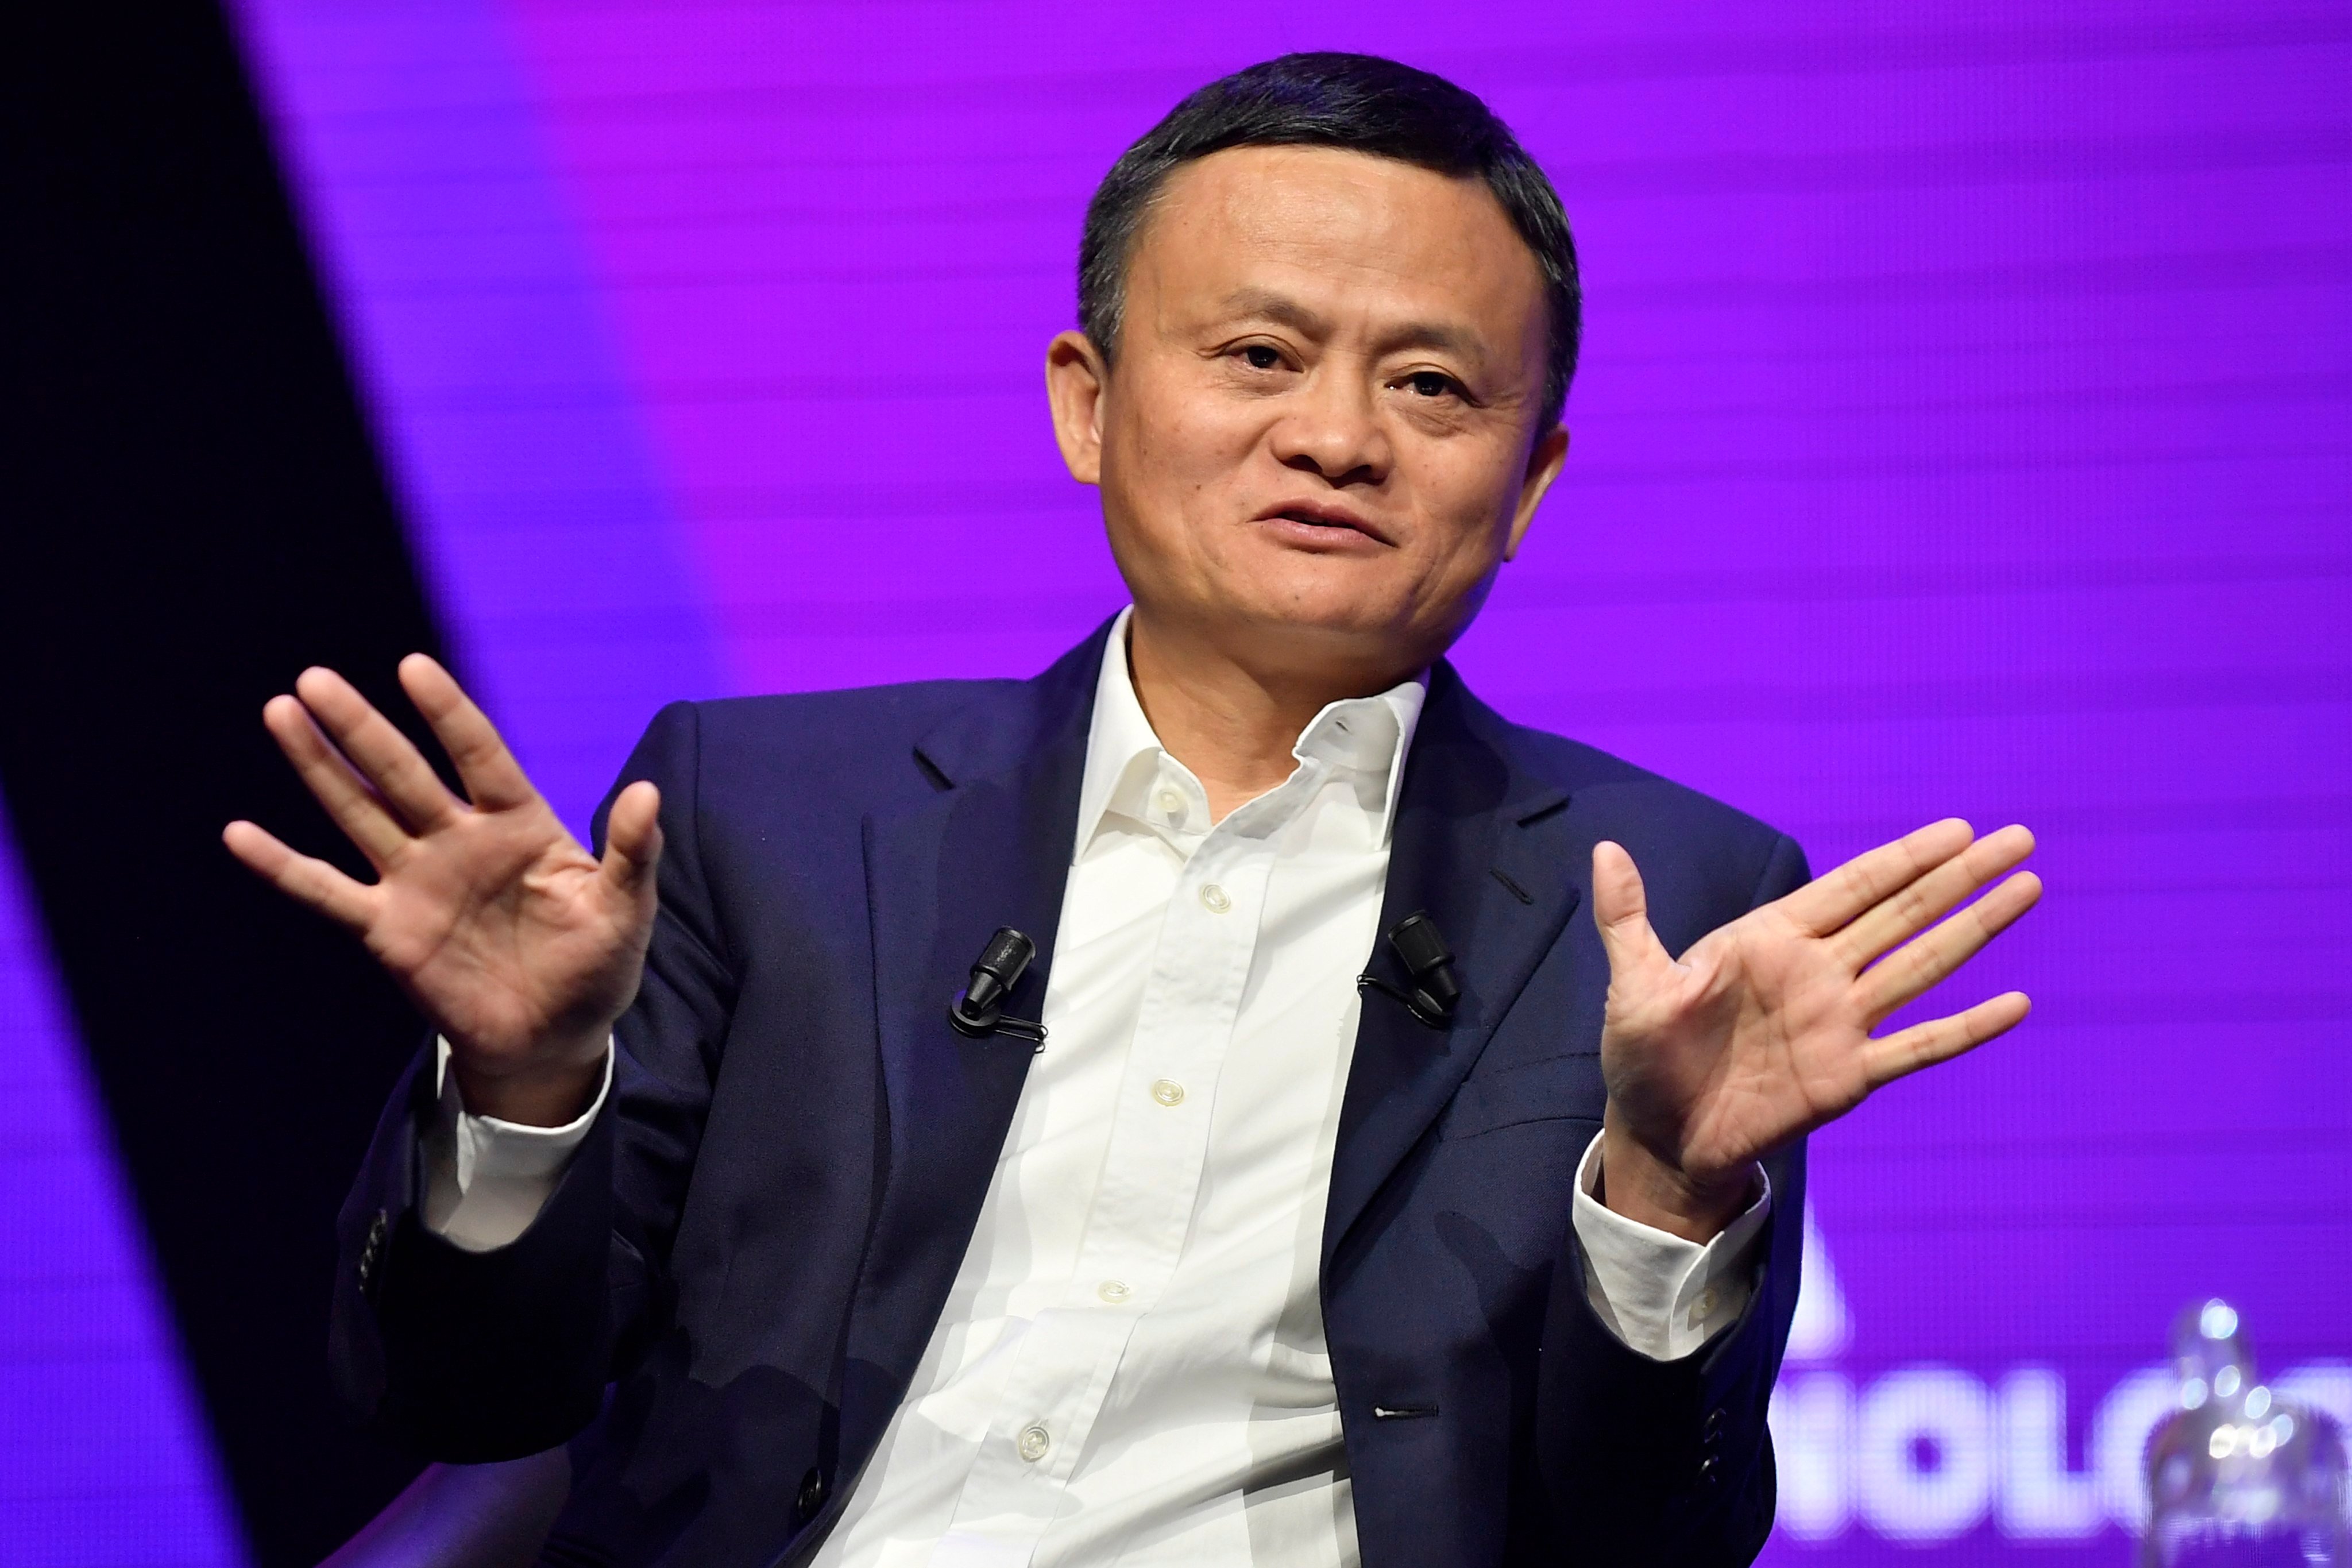 Alibaba Group co-founder and executive chairman Jack Ma at the Vivatech startups and innovation fair in Paris, France, on May 16, 2019 Photo: EPA-EFE